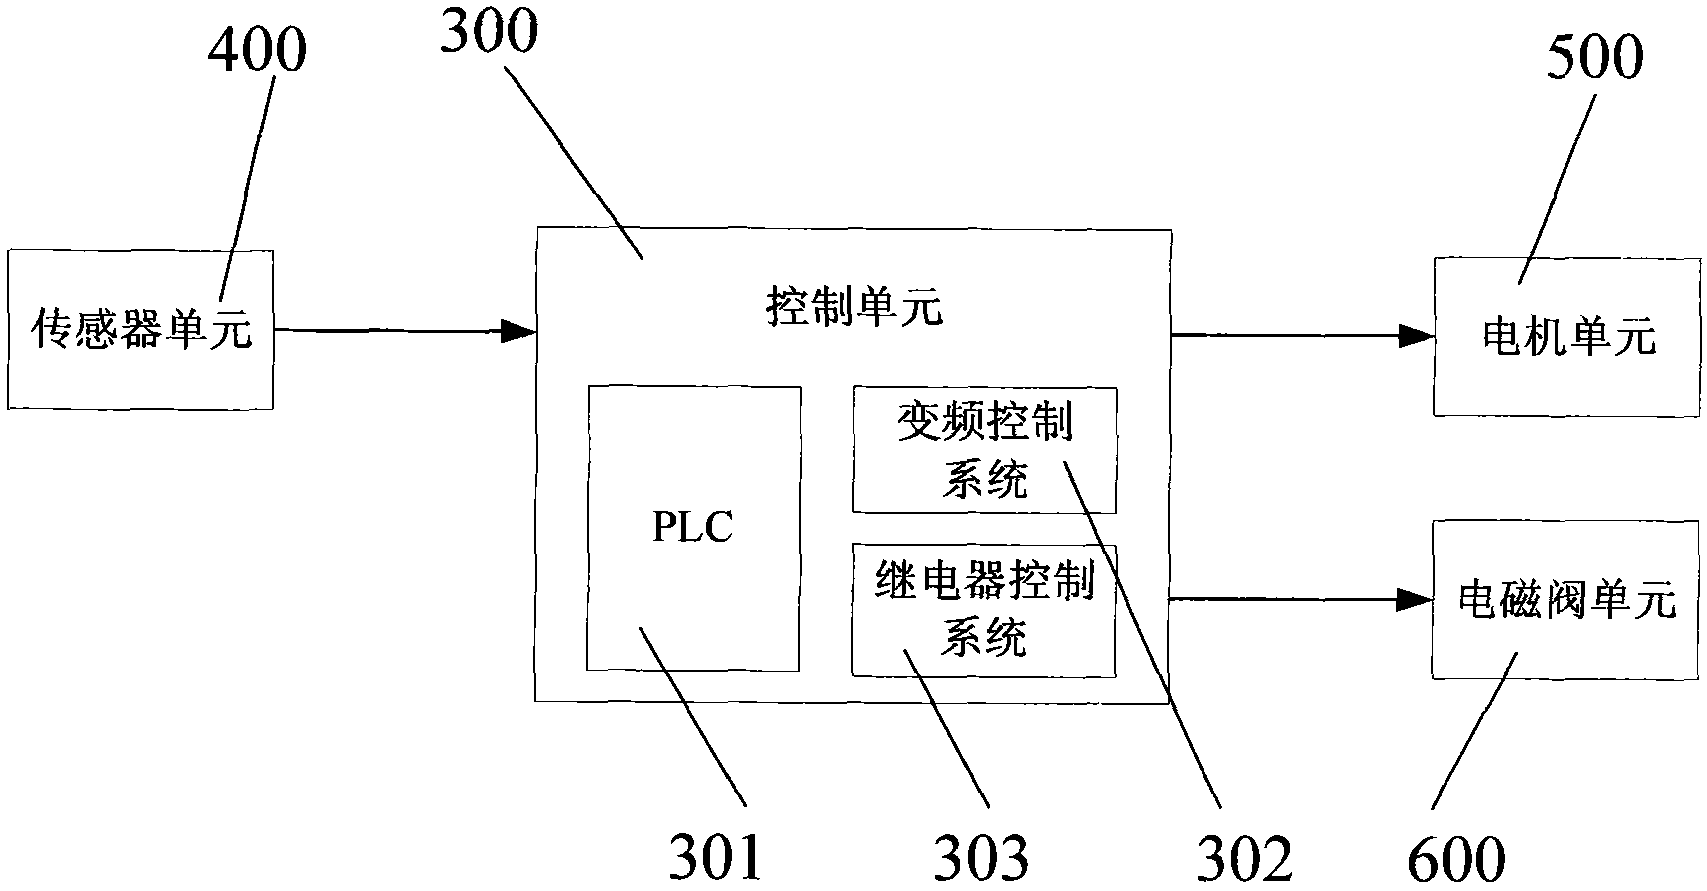 Electric control system and control method for automatic flaw detection of steel pipes